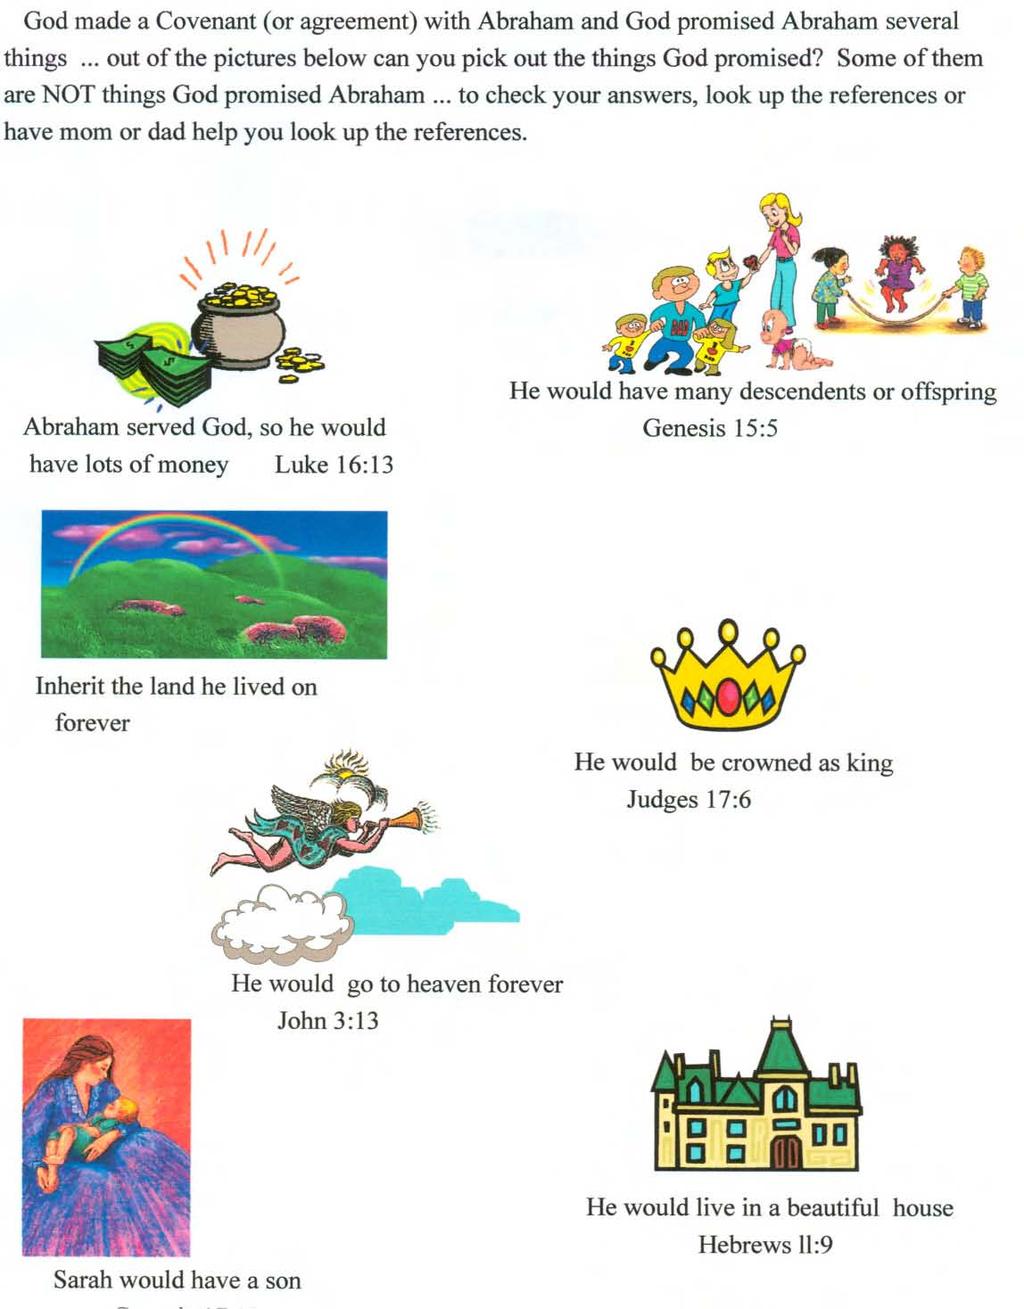 God made a Covenant (or agreement) with Abraham and God promised Abraham several things... out of the pictures below can you pick out the things God promised?